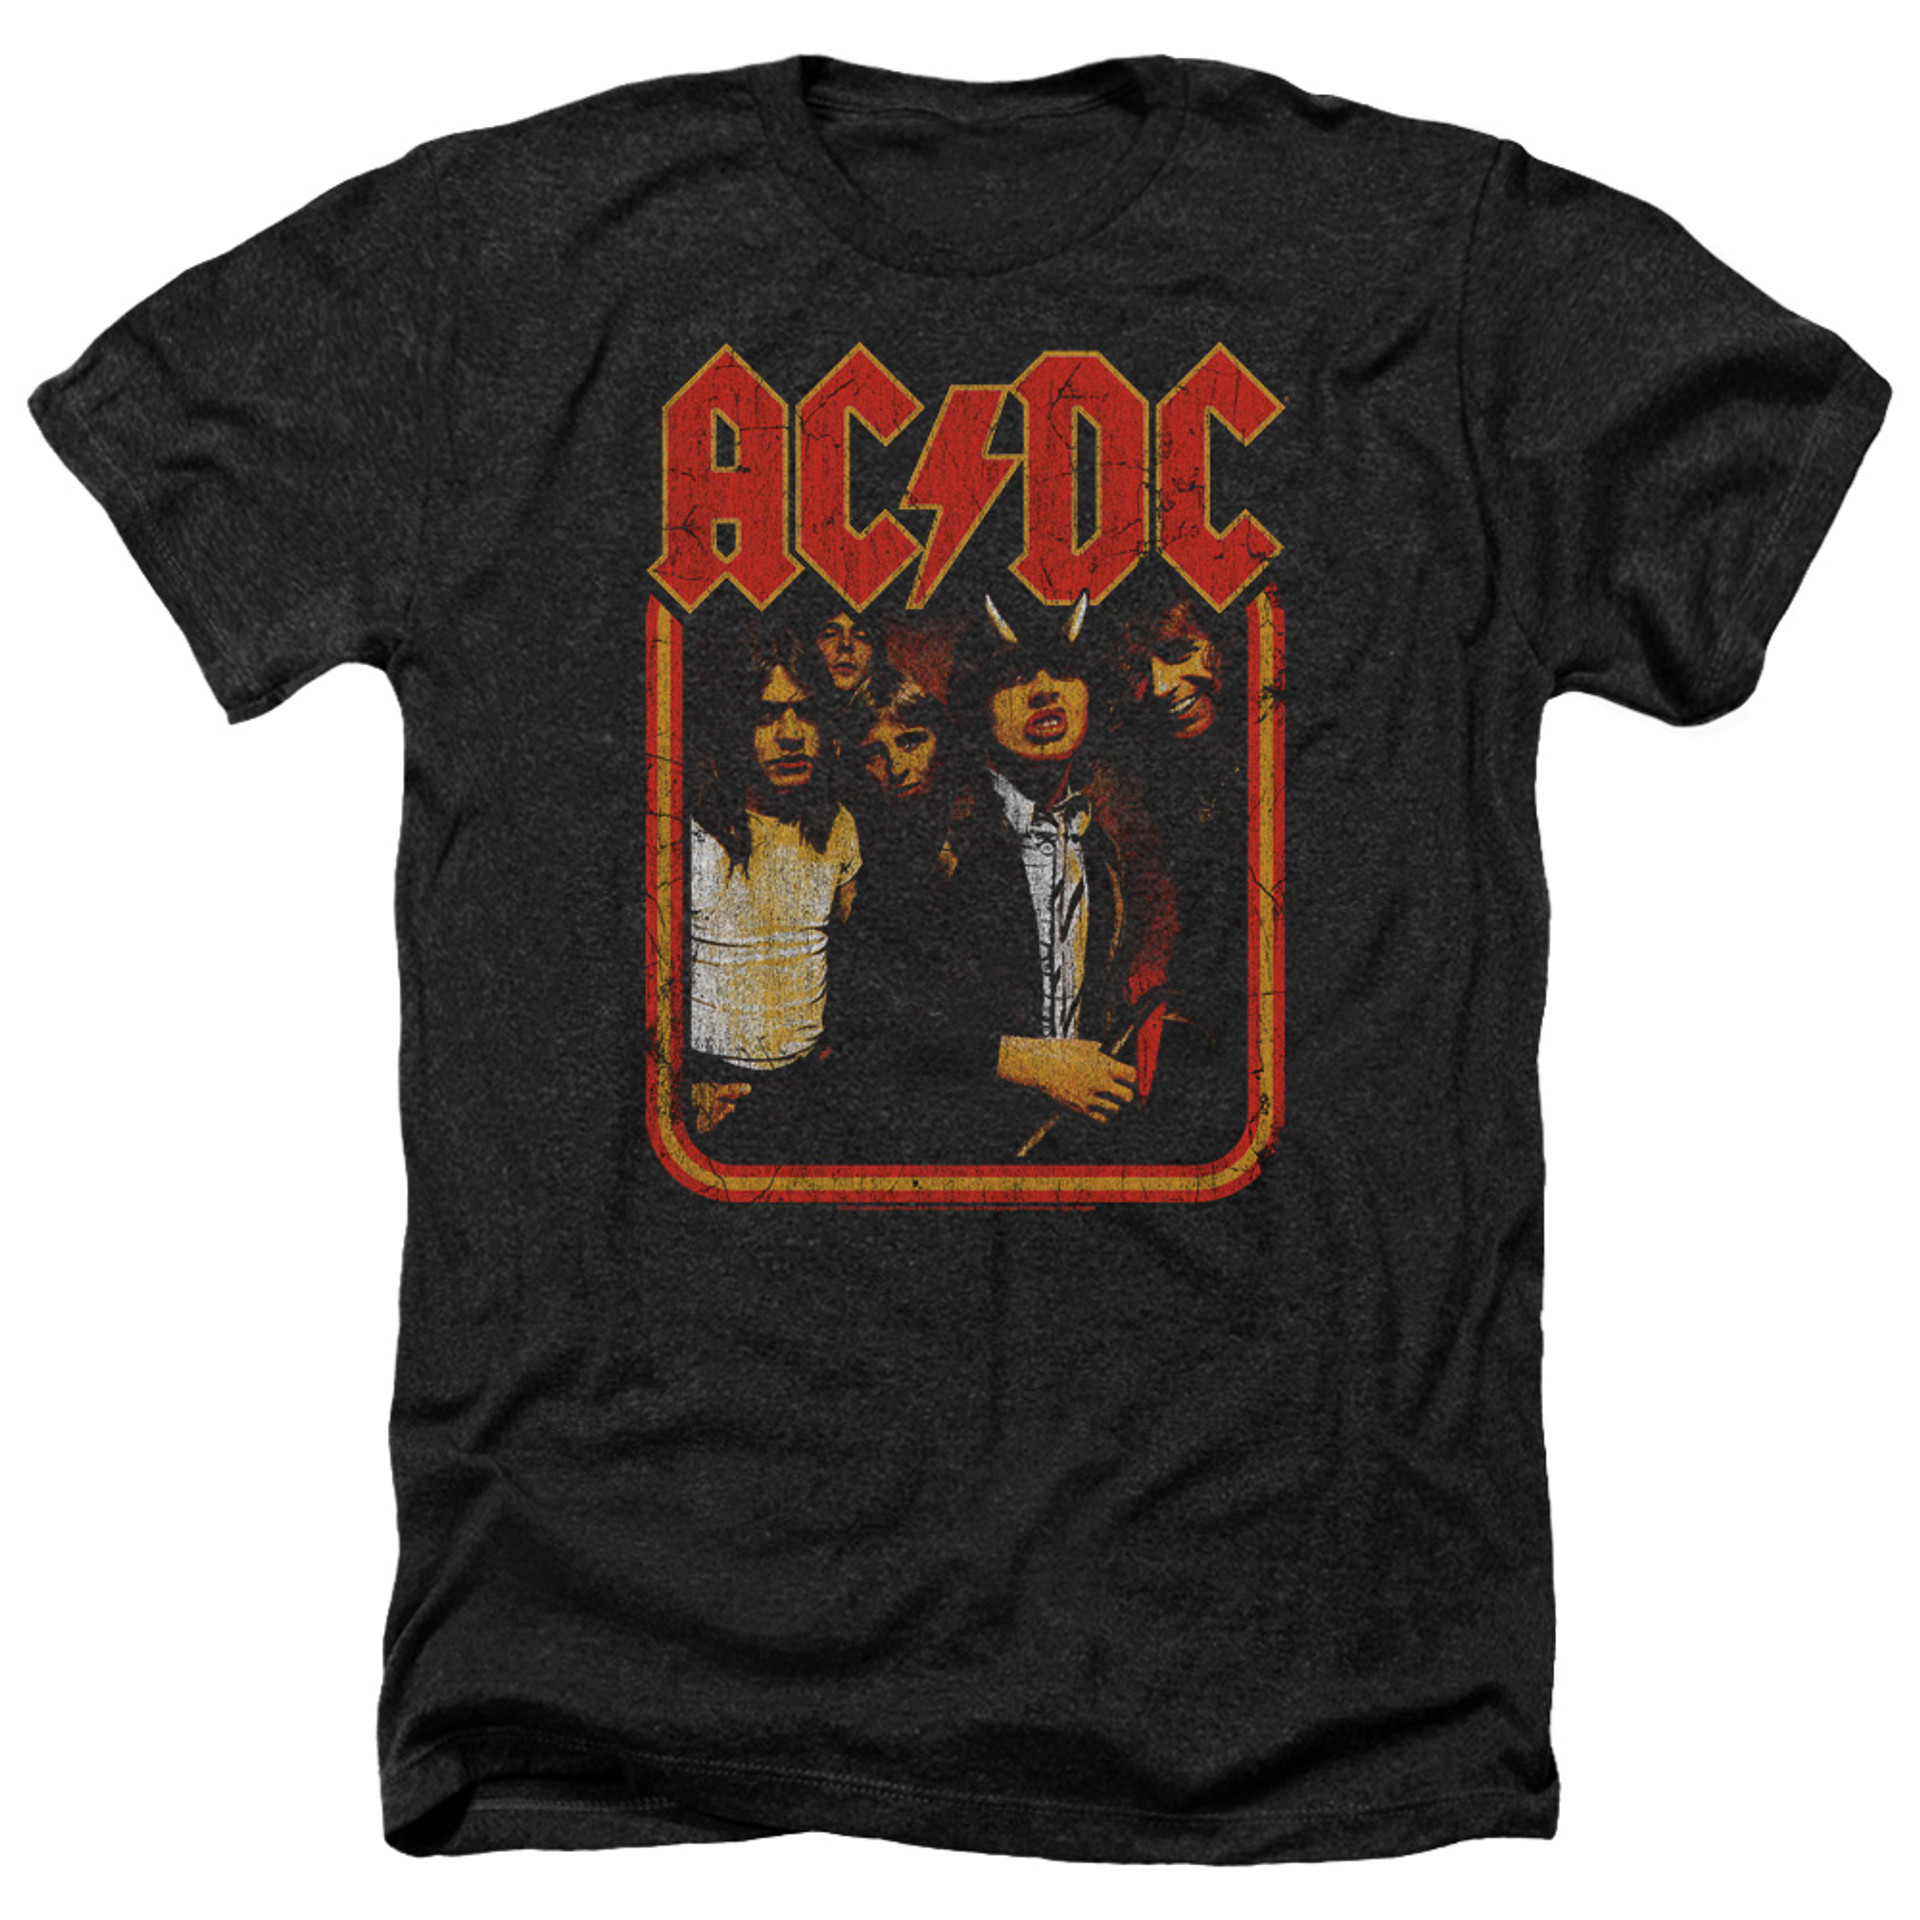 acdc group distressed adult heather t shirt black 8276 tddcq